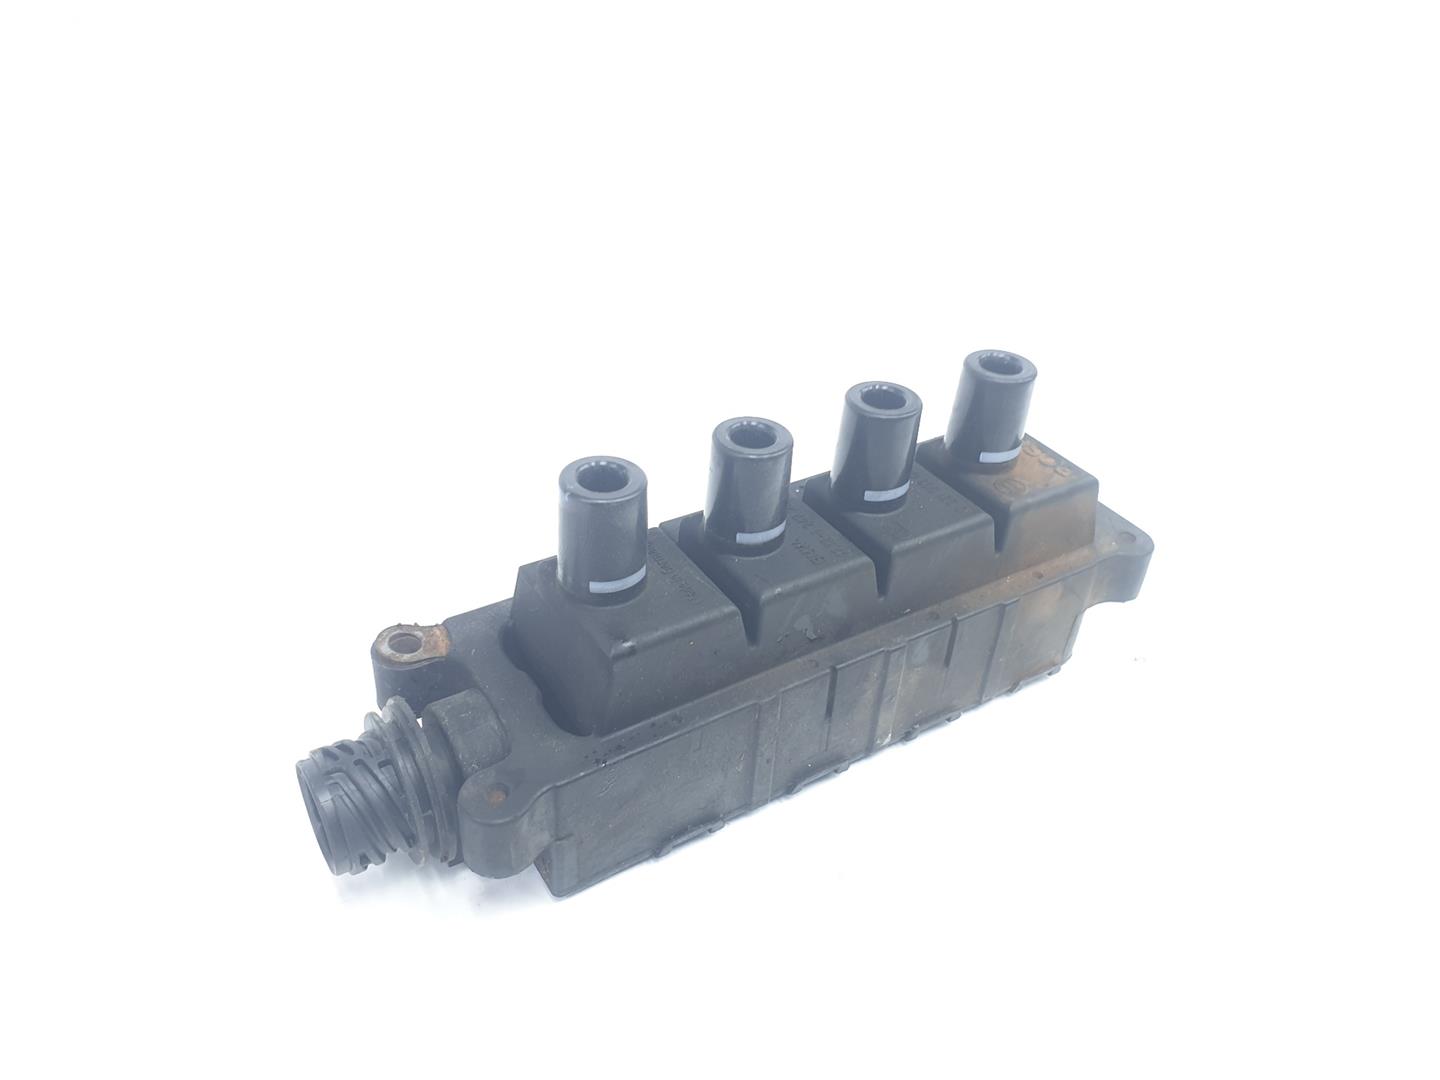 BMW 3 Series E46 (1997-2006) High Voltage Ignition Coil 1247281, 12131247281 24245660